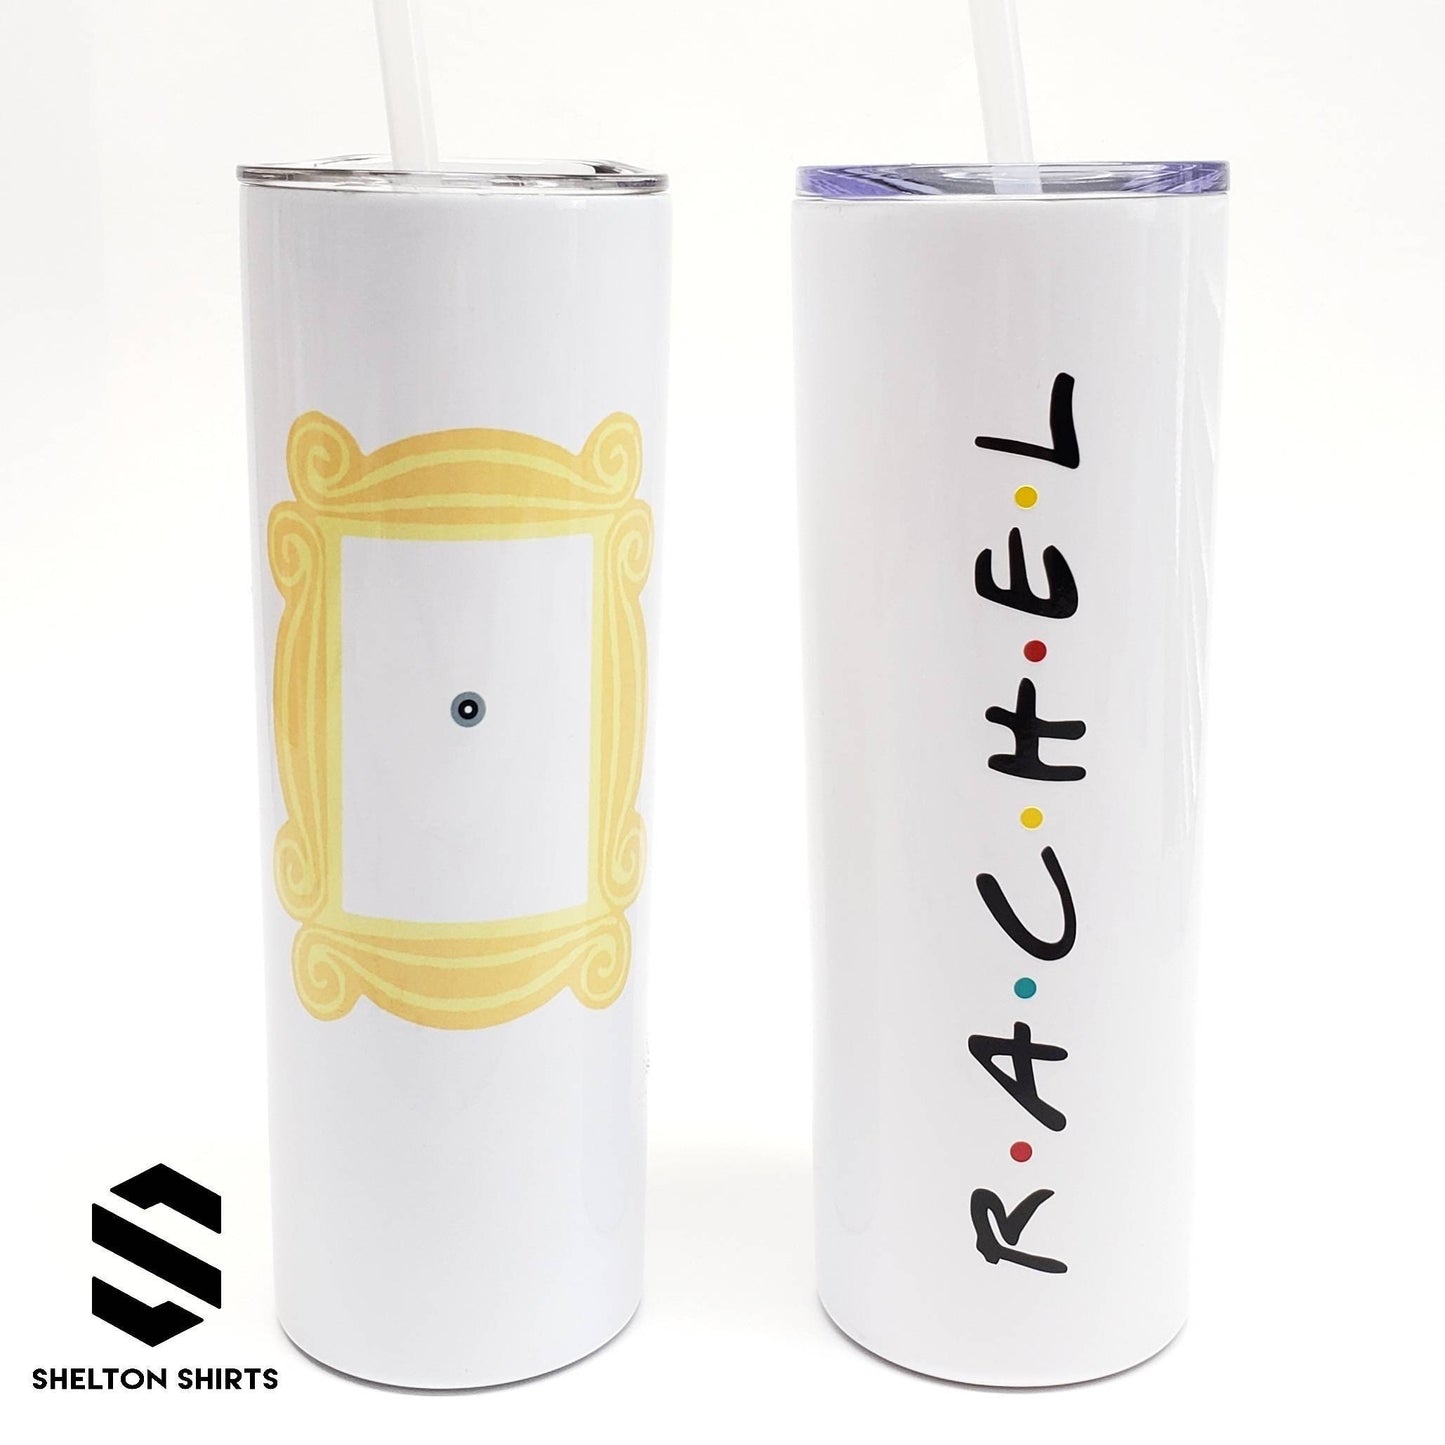 Tumbler with Yellow Frame and Peephole and Your Name in the F.R.I.E.N.D.S style on the back